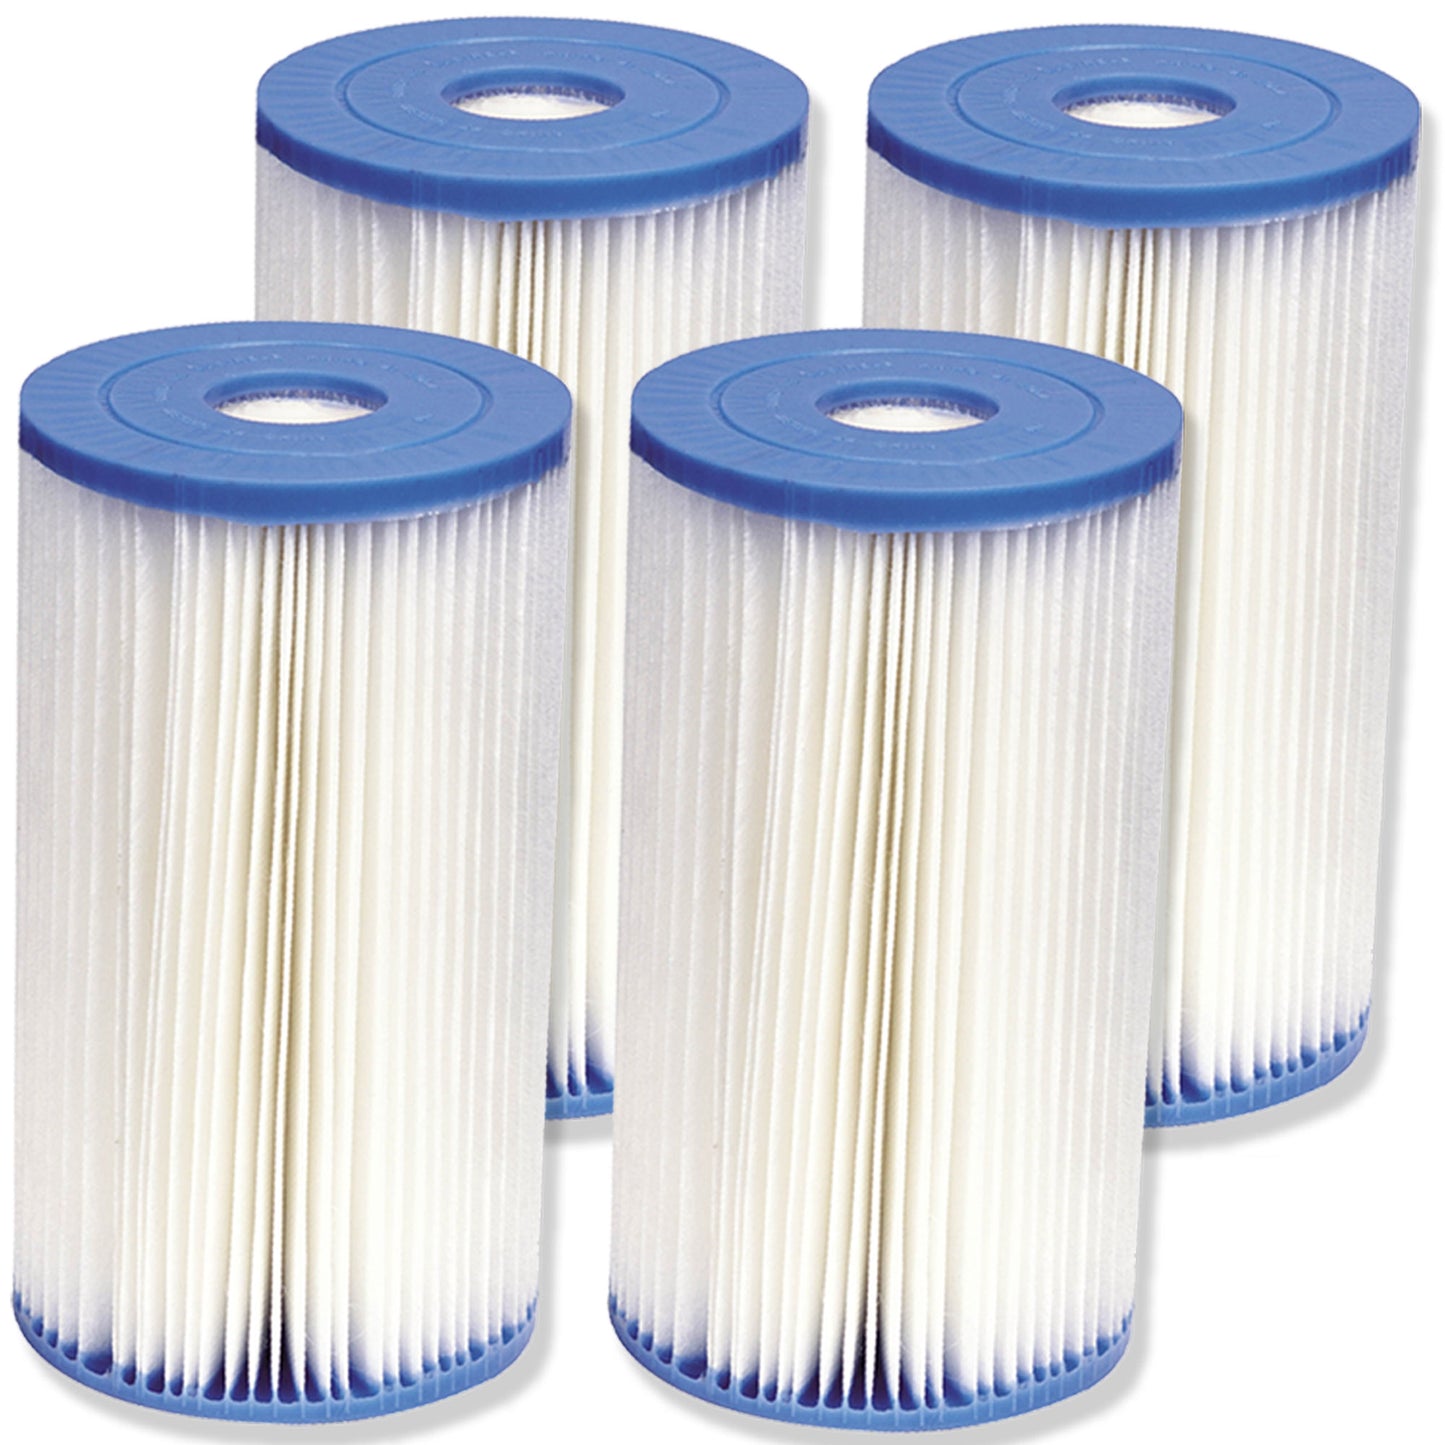 4 Pack Intex Type B Filter Cartridge for Above Ground Swimming Pool Pumps